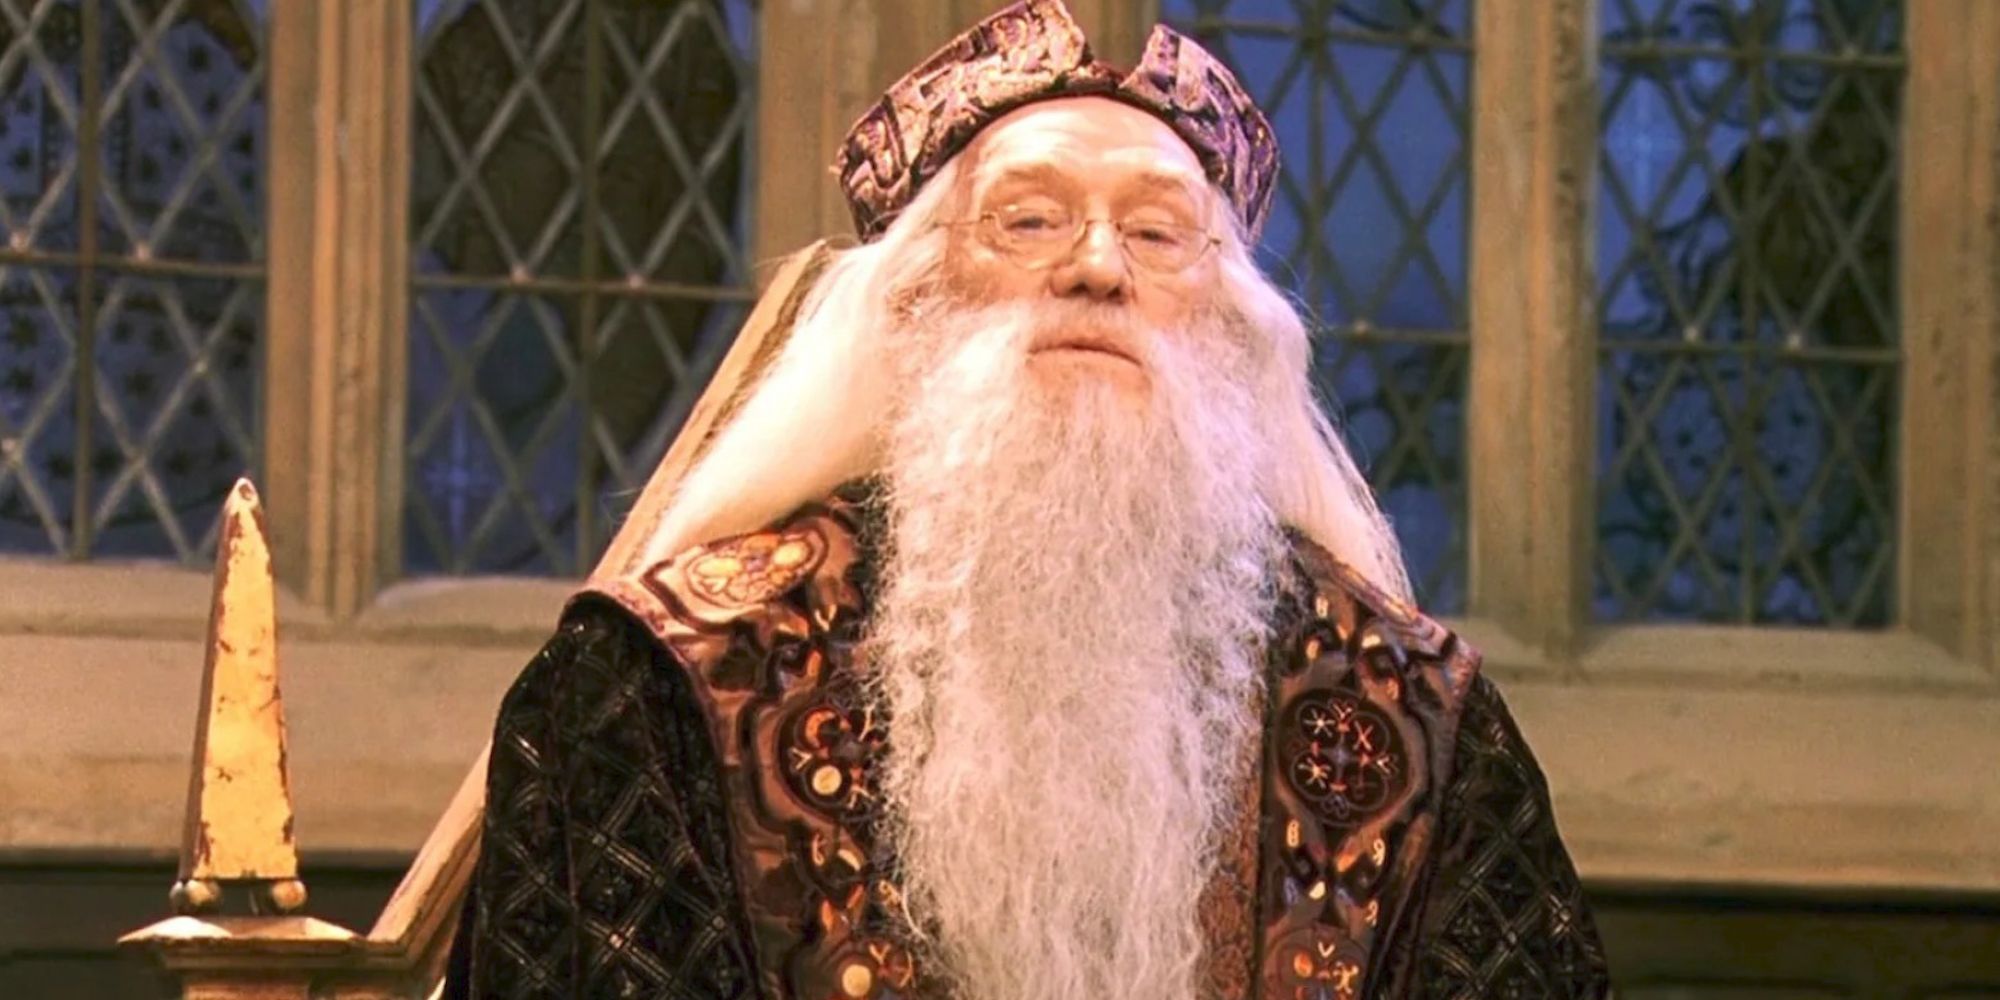 Dumbledore giving a speech in Harry Potter and the Philosopher's Stone